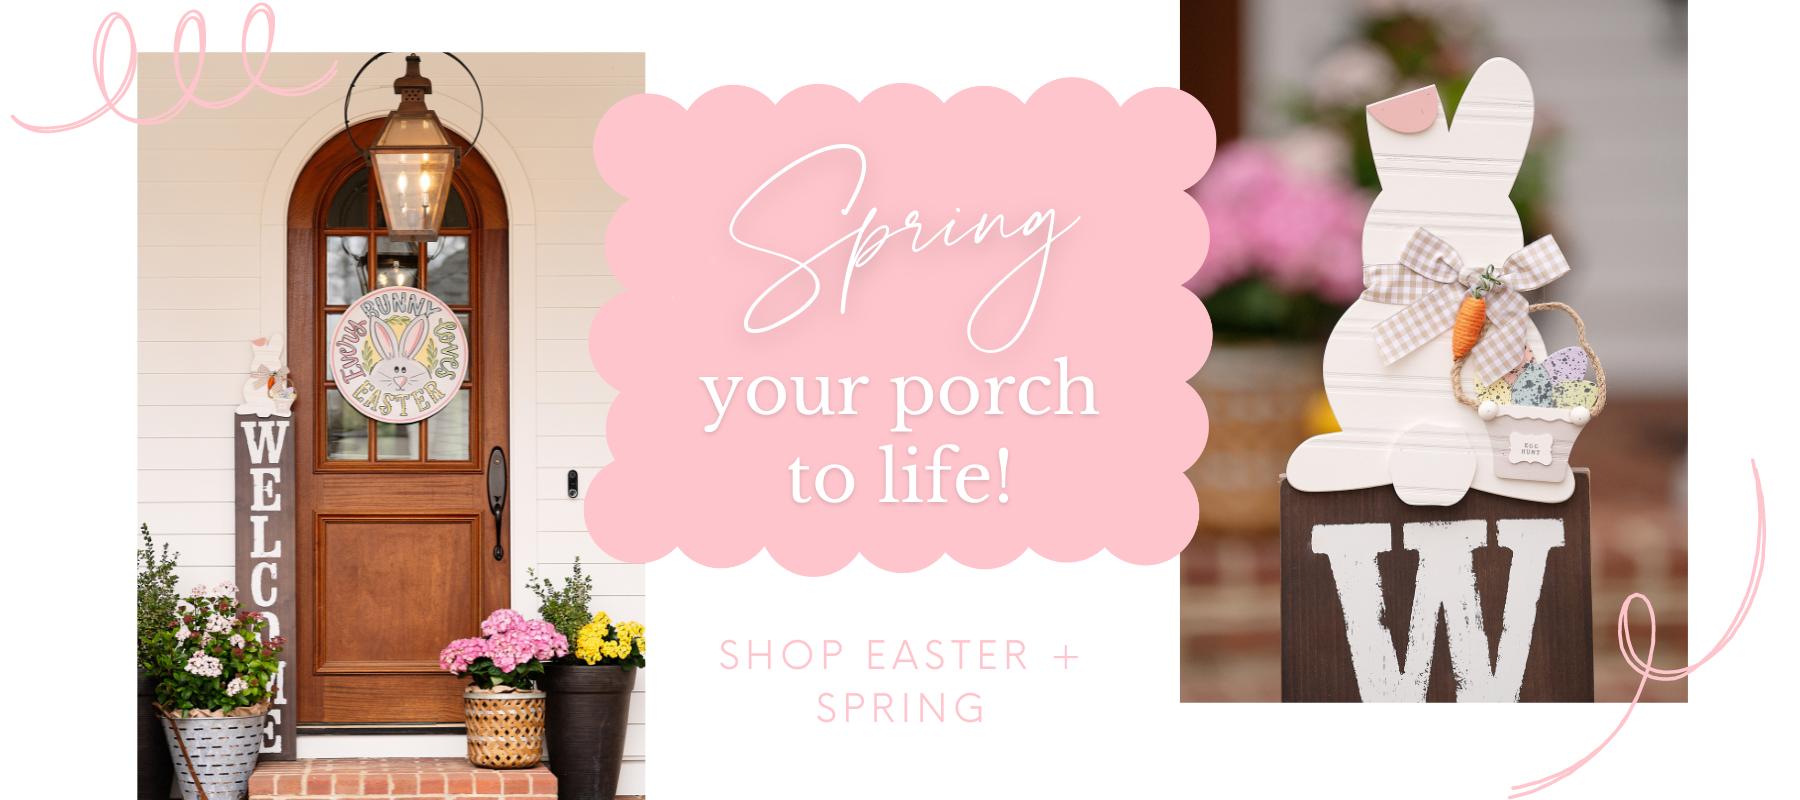 spring your porch to life! shop easter and spring